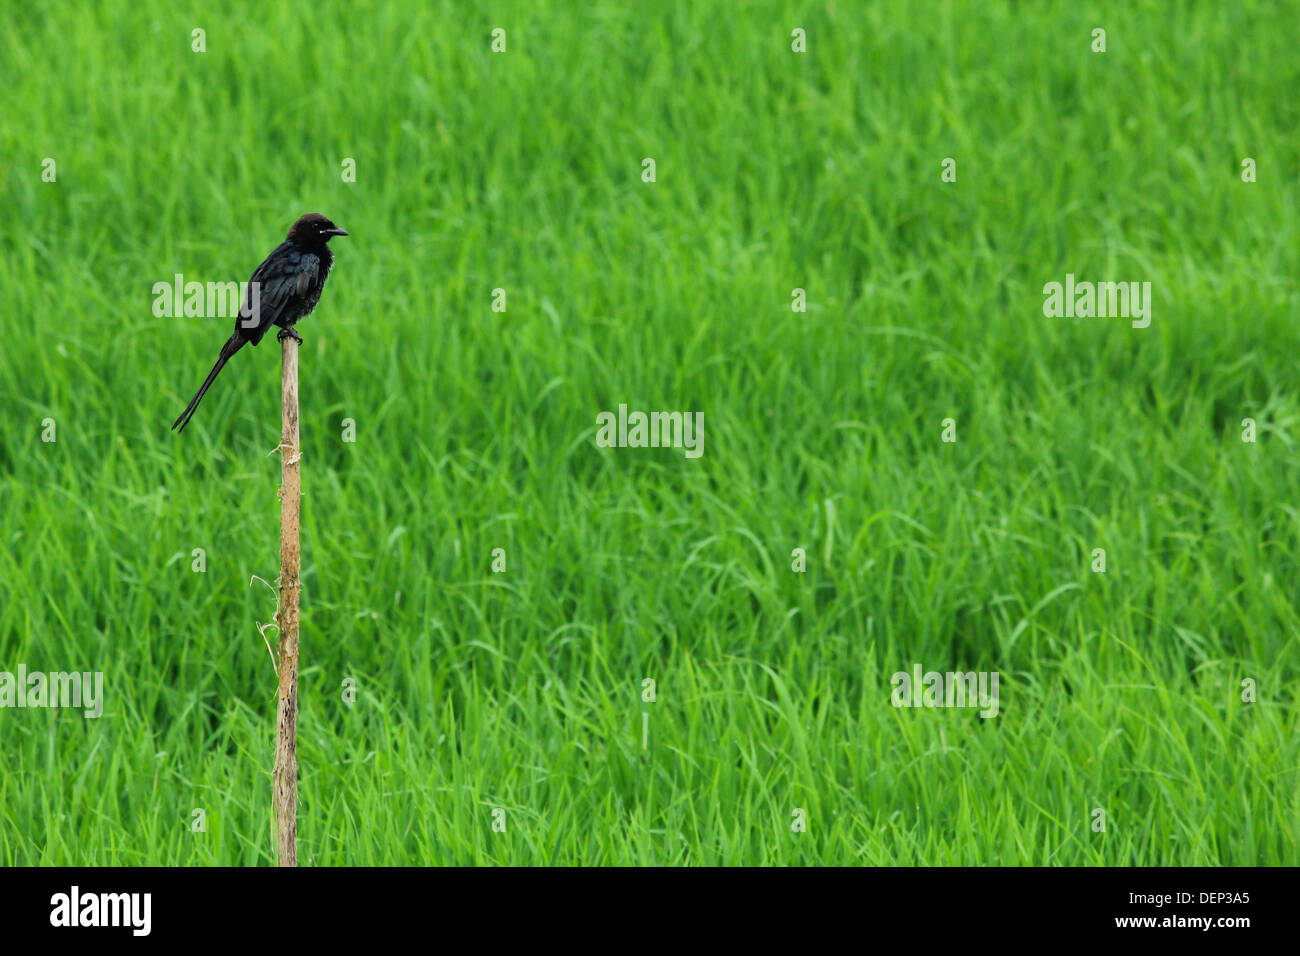 Black Drongo (Dicrurus macrocercus) perched on branch in a paddy field Stock Photo